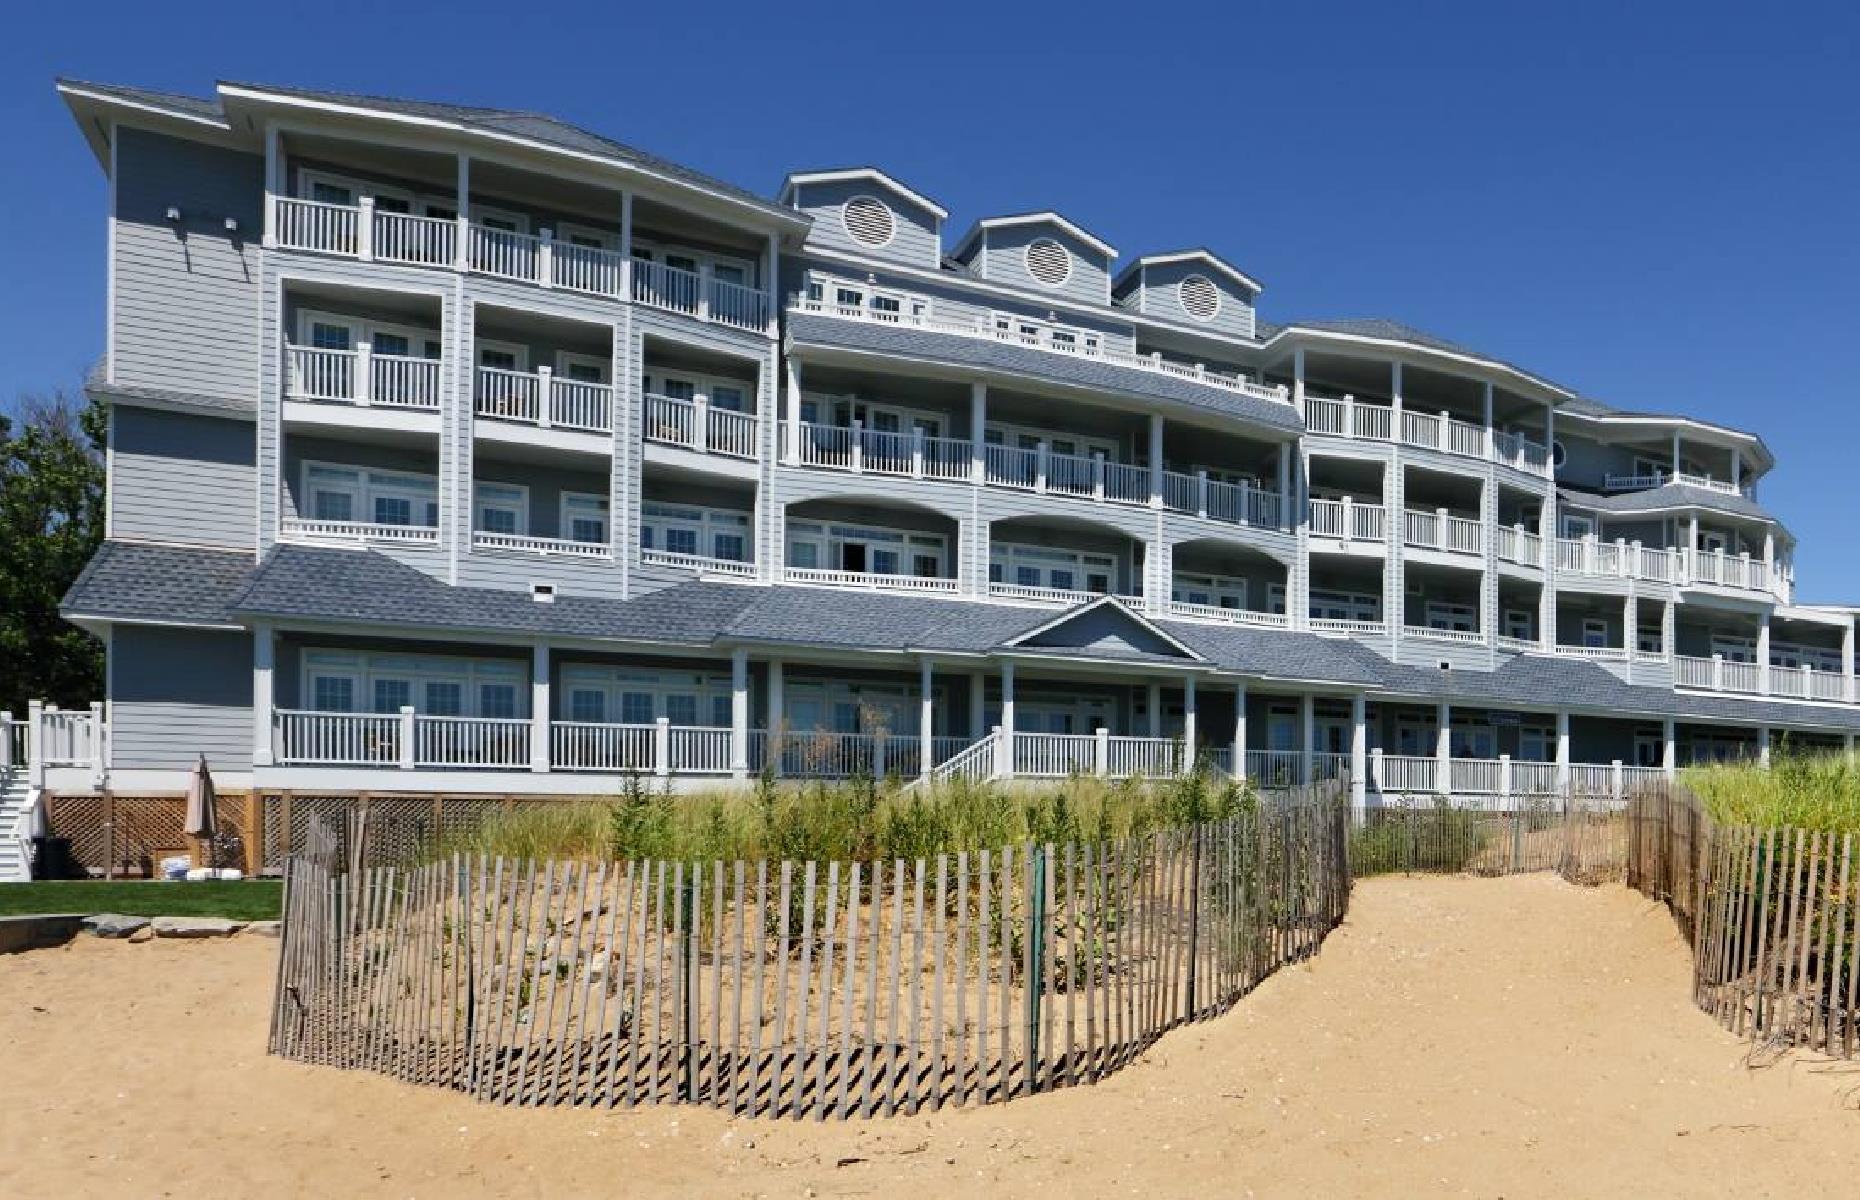 <p>Overlooking Long Island South, <a href="https://www.hilton.com/en/hotels/mpecuqq-madison-beach-hotel/">this Connecticut beach resort</a> is an ideal summertime retreat. Just a few minutes from downtown Madison, the hotel is right on the beach, with chairs, towels and umbrellas available for resort guests. Visitors can also take full advantage of the serene Sounds of the Sea Spa, fine dining at The Wharf restaurant and outdoor casual fare at The Porch.</p>